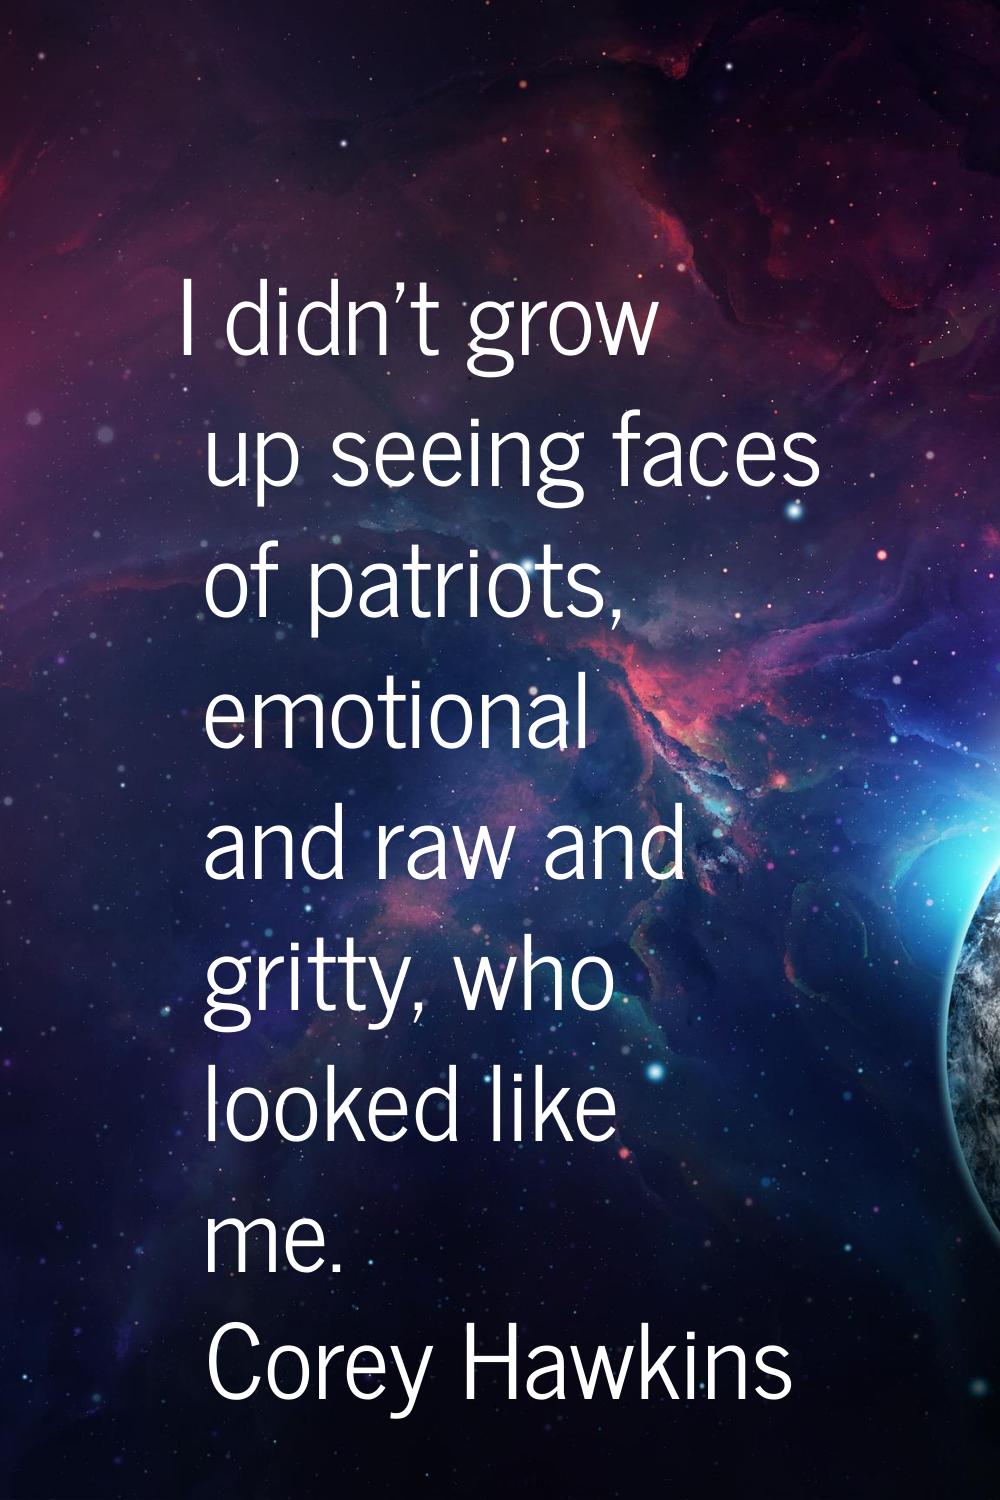 I didn't grow up seeing faces of patriots, emotional and raw and gritty, who looked like me.